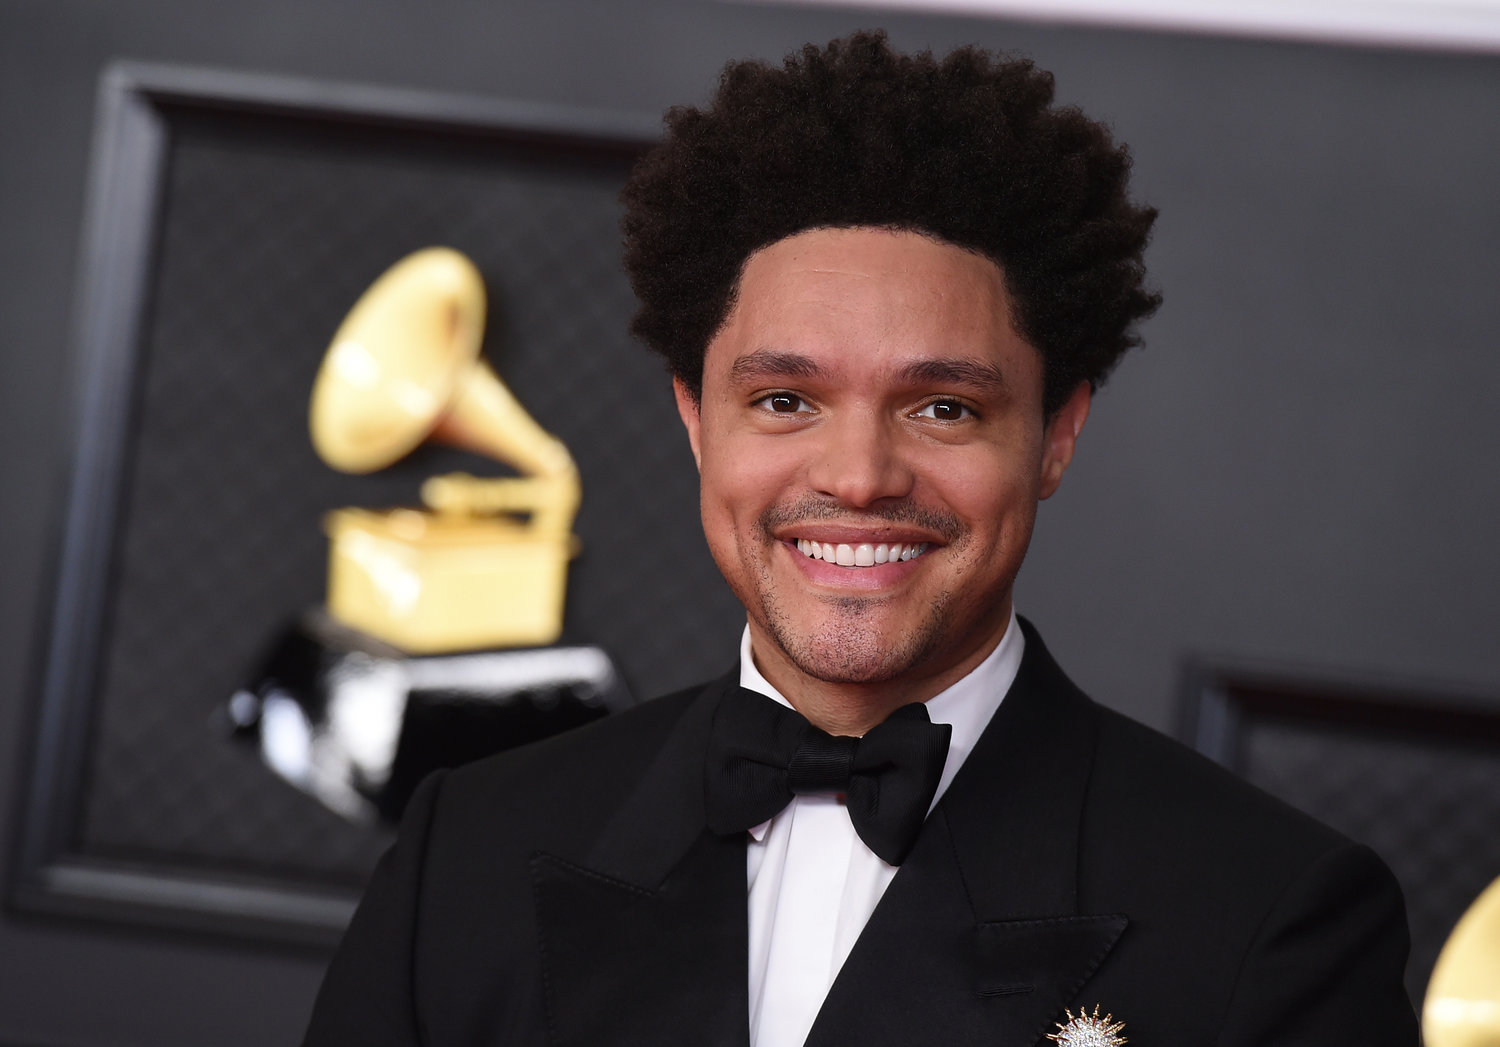 Trevor Noah appears at the 63rd annual Grammy Awards in Los Angeles on March 14, 2021. Noah is hosting the Grammy Awards for a third-straight year.